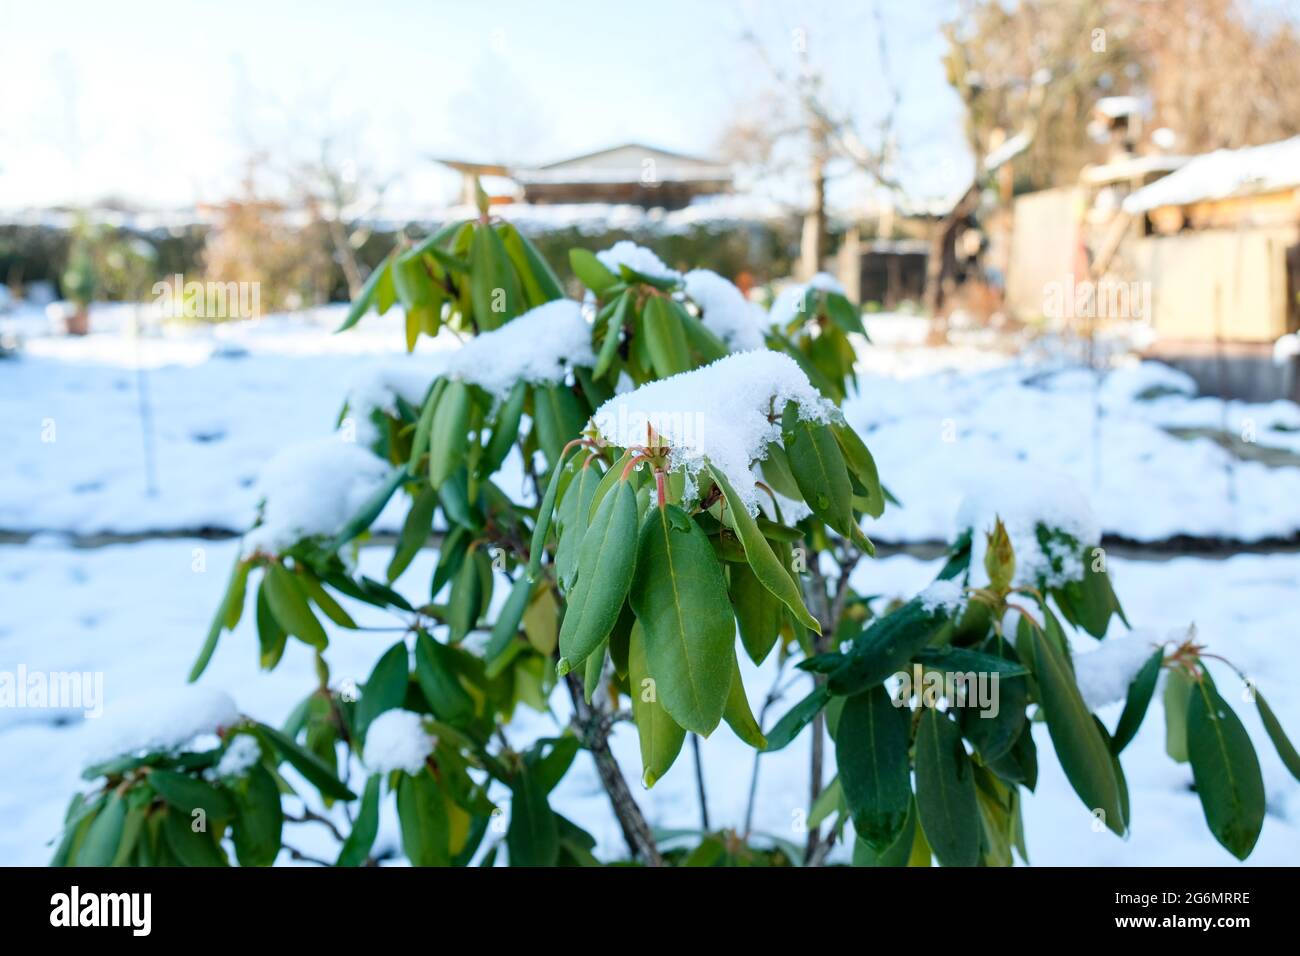 Rhododendron covered with snow in winter daytime Stock Photo